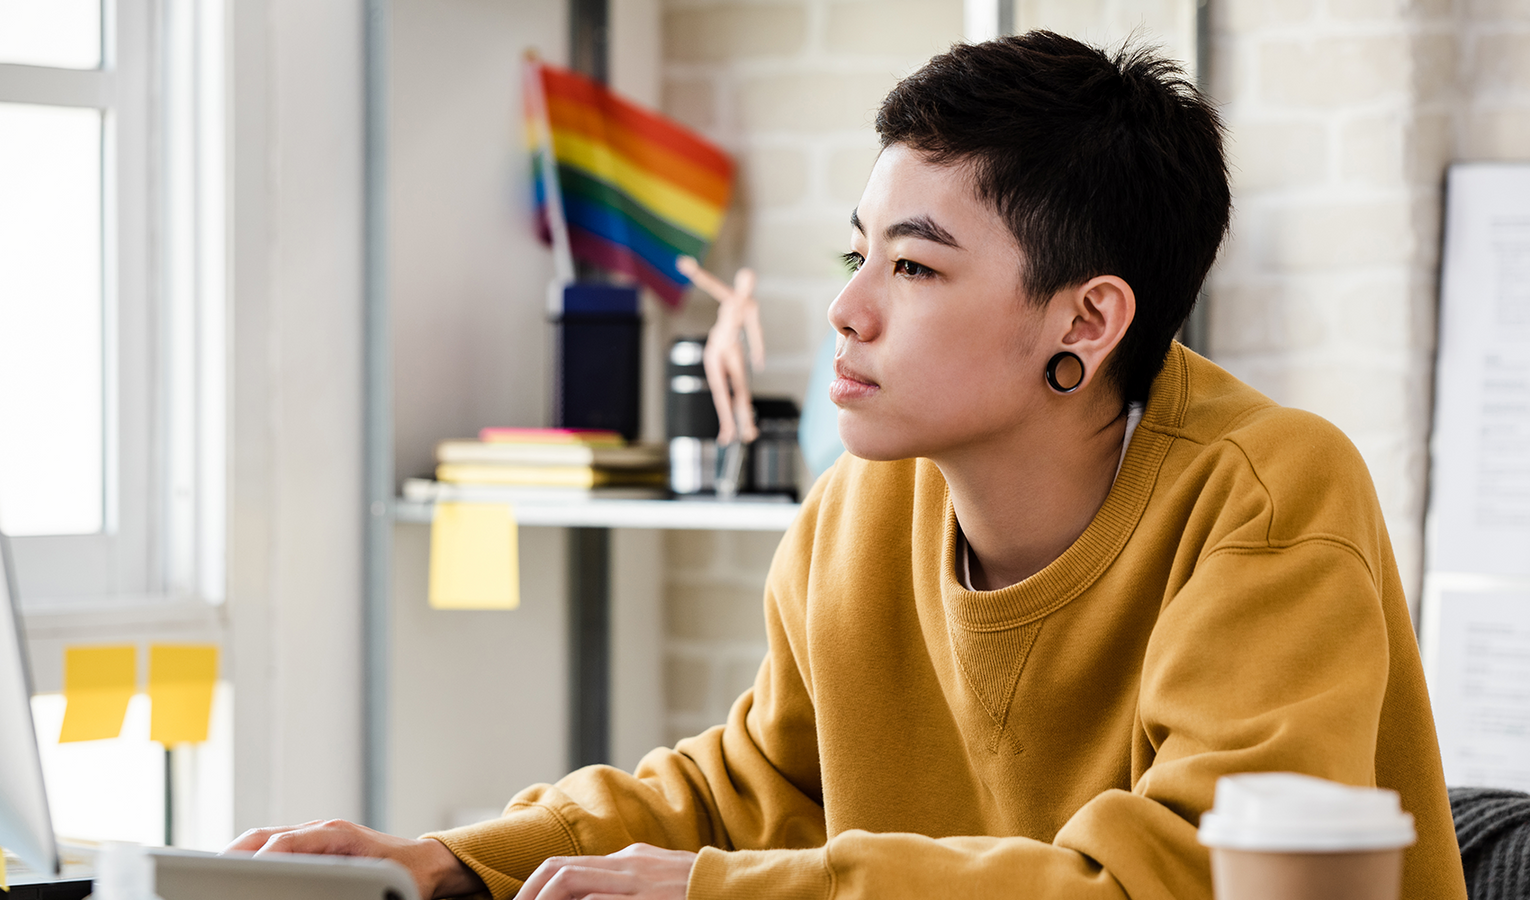 5 ways to make your workplace more LGBTQ+ inclusive